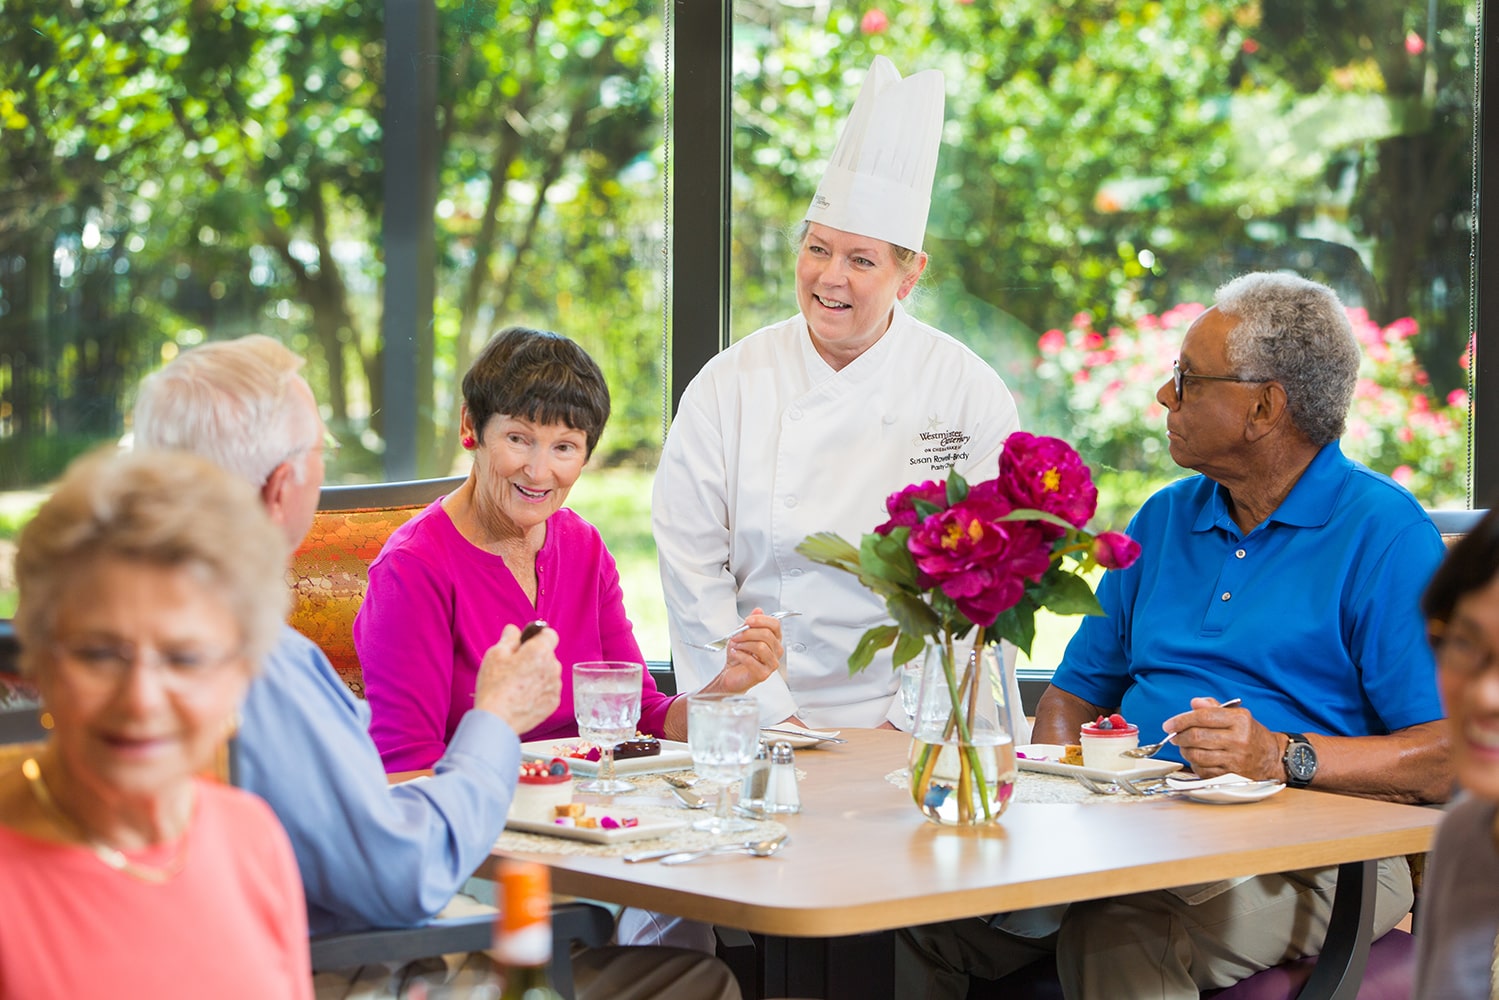 Chef talking to group of people eating dessert at table with vase of pink flowers in the middle